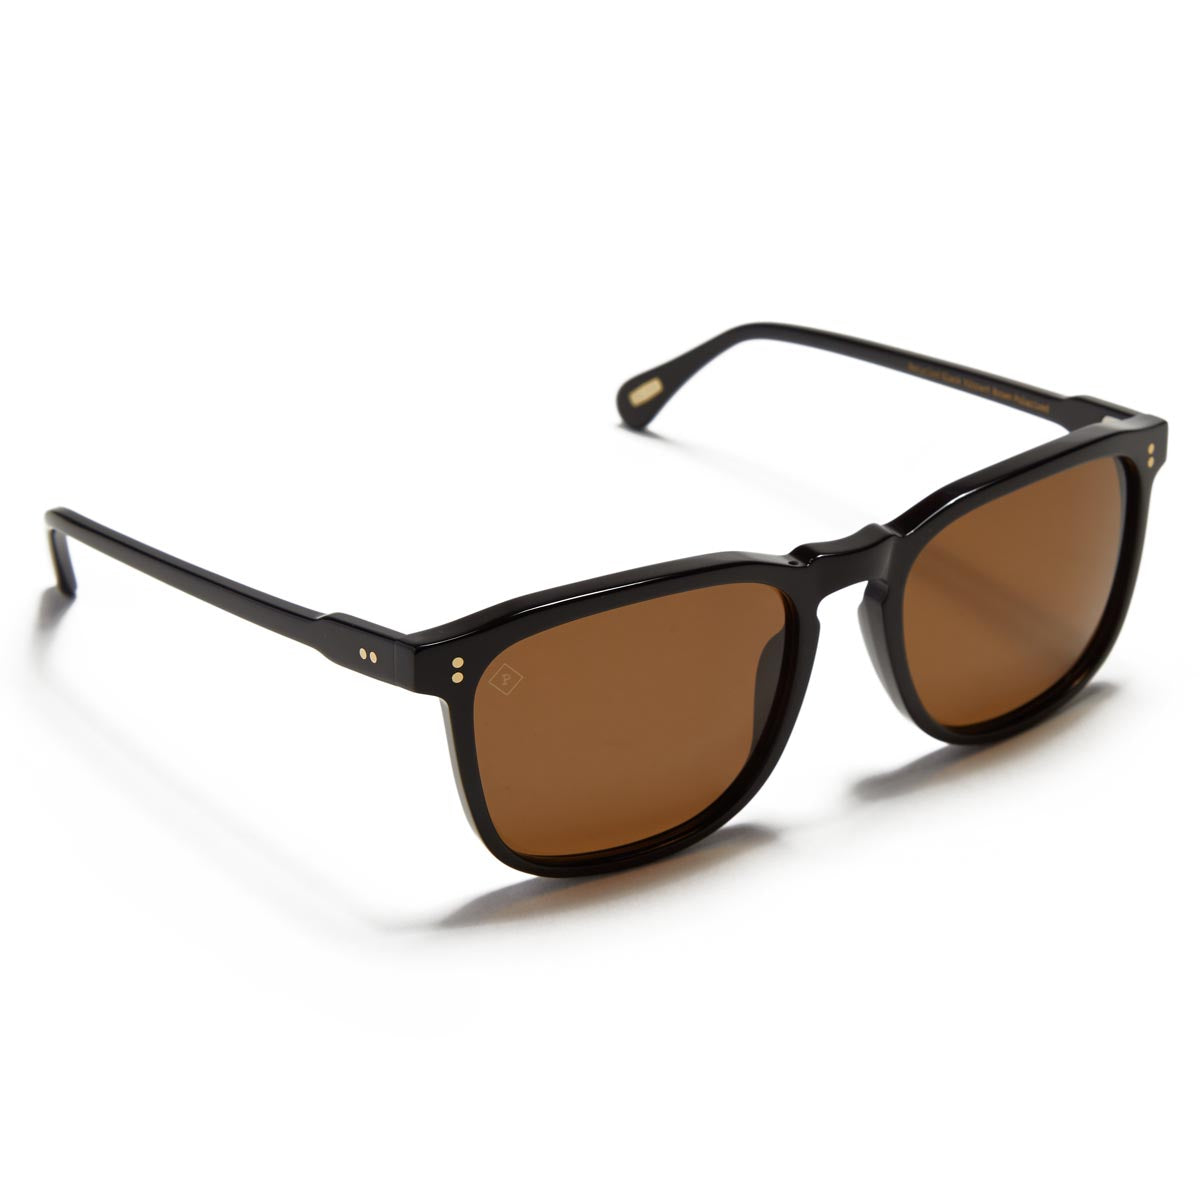 Raen Wiley 54 Sunglasses - Recycled Black/Vibrant Browm image 1